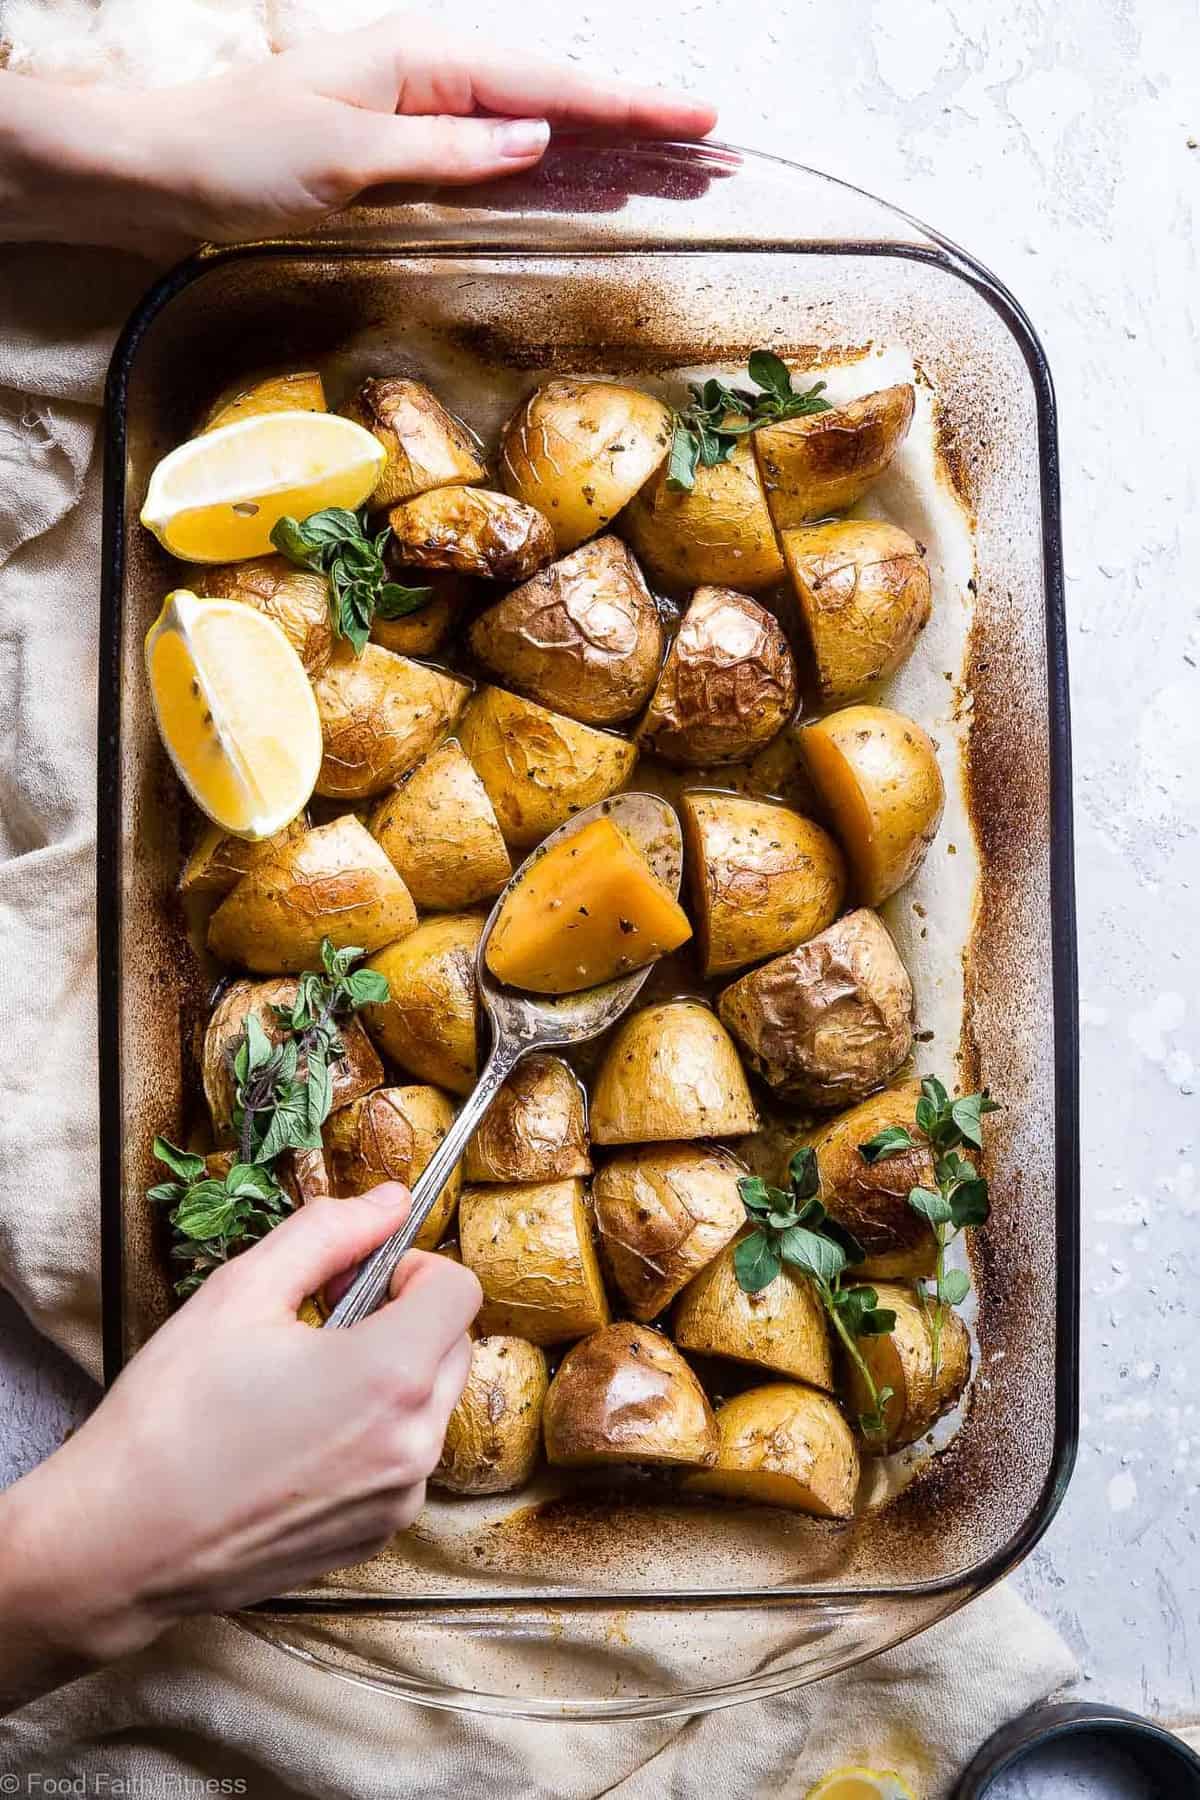 Oven Roasted Lemon Greek Potatoes - These are the BEST Oven Roasted Lemon Greek Potatoes! Tangy, zesty and so packed with flavor you will make them all the time! SO easy, whole30 complaint and vegan/ gluten free too! | #Foodfaithfitness | #Glutenfree #Vegan #Whole30 #Healthy #Dairyfree